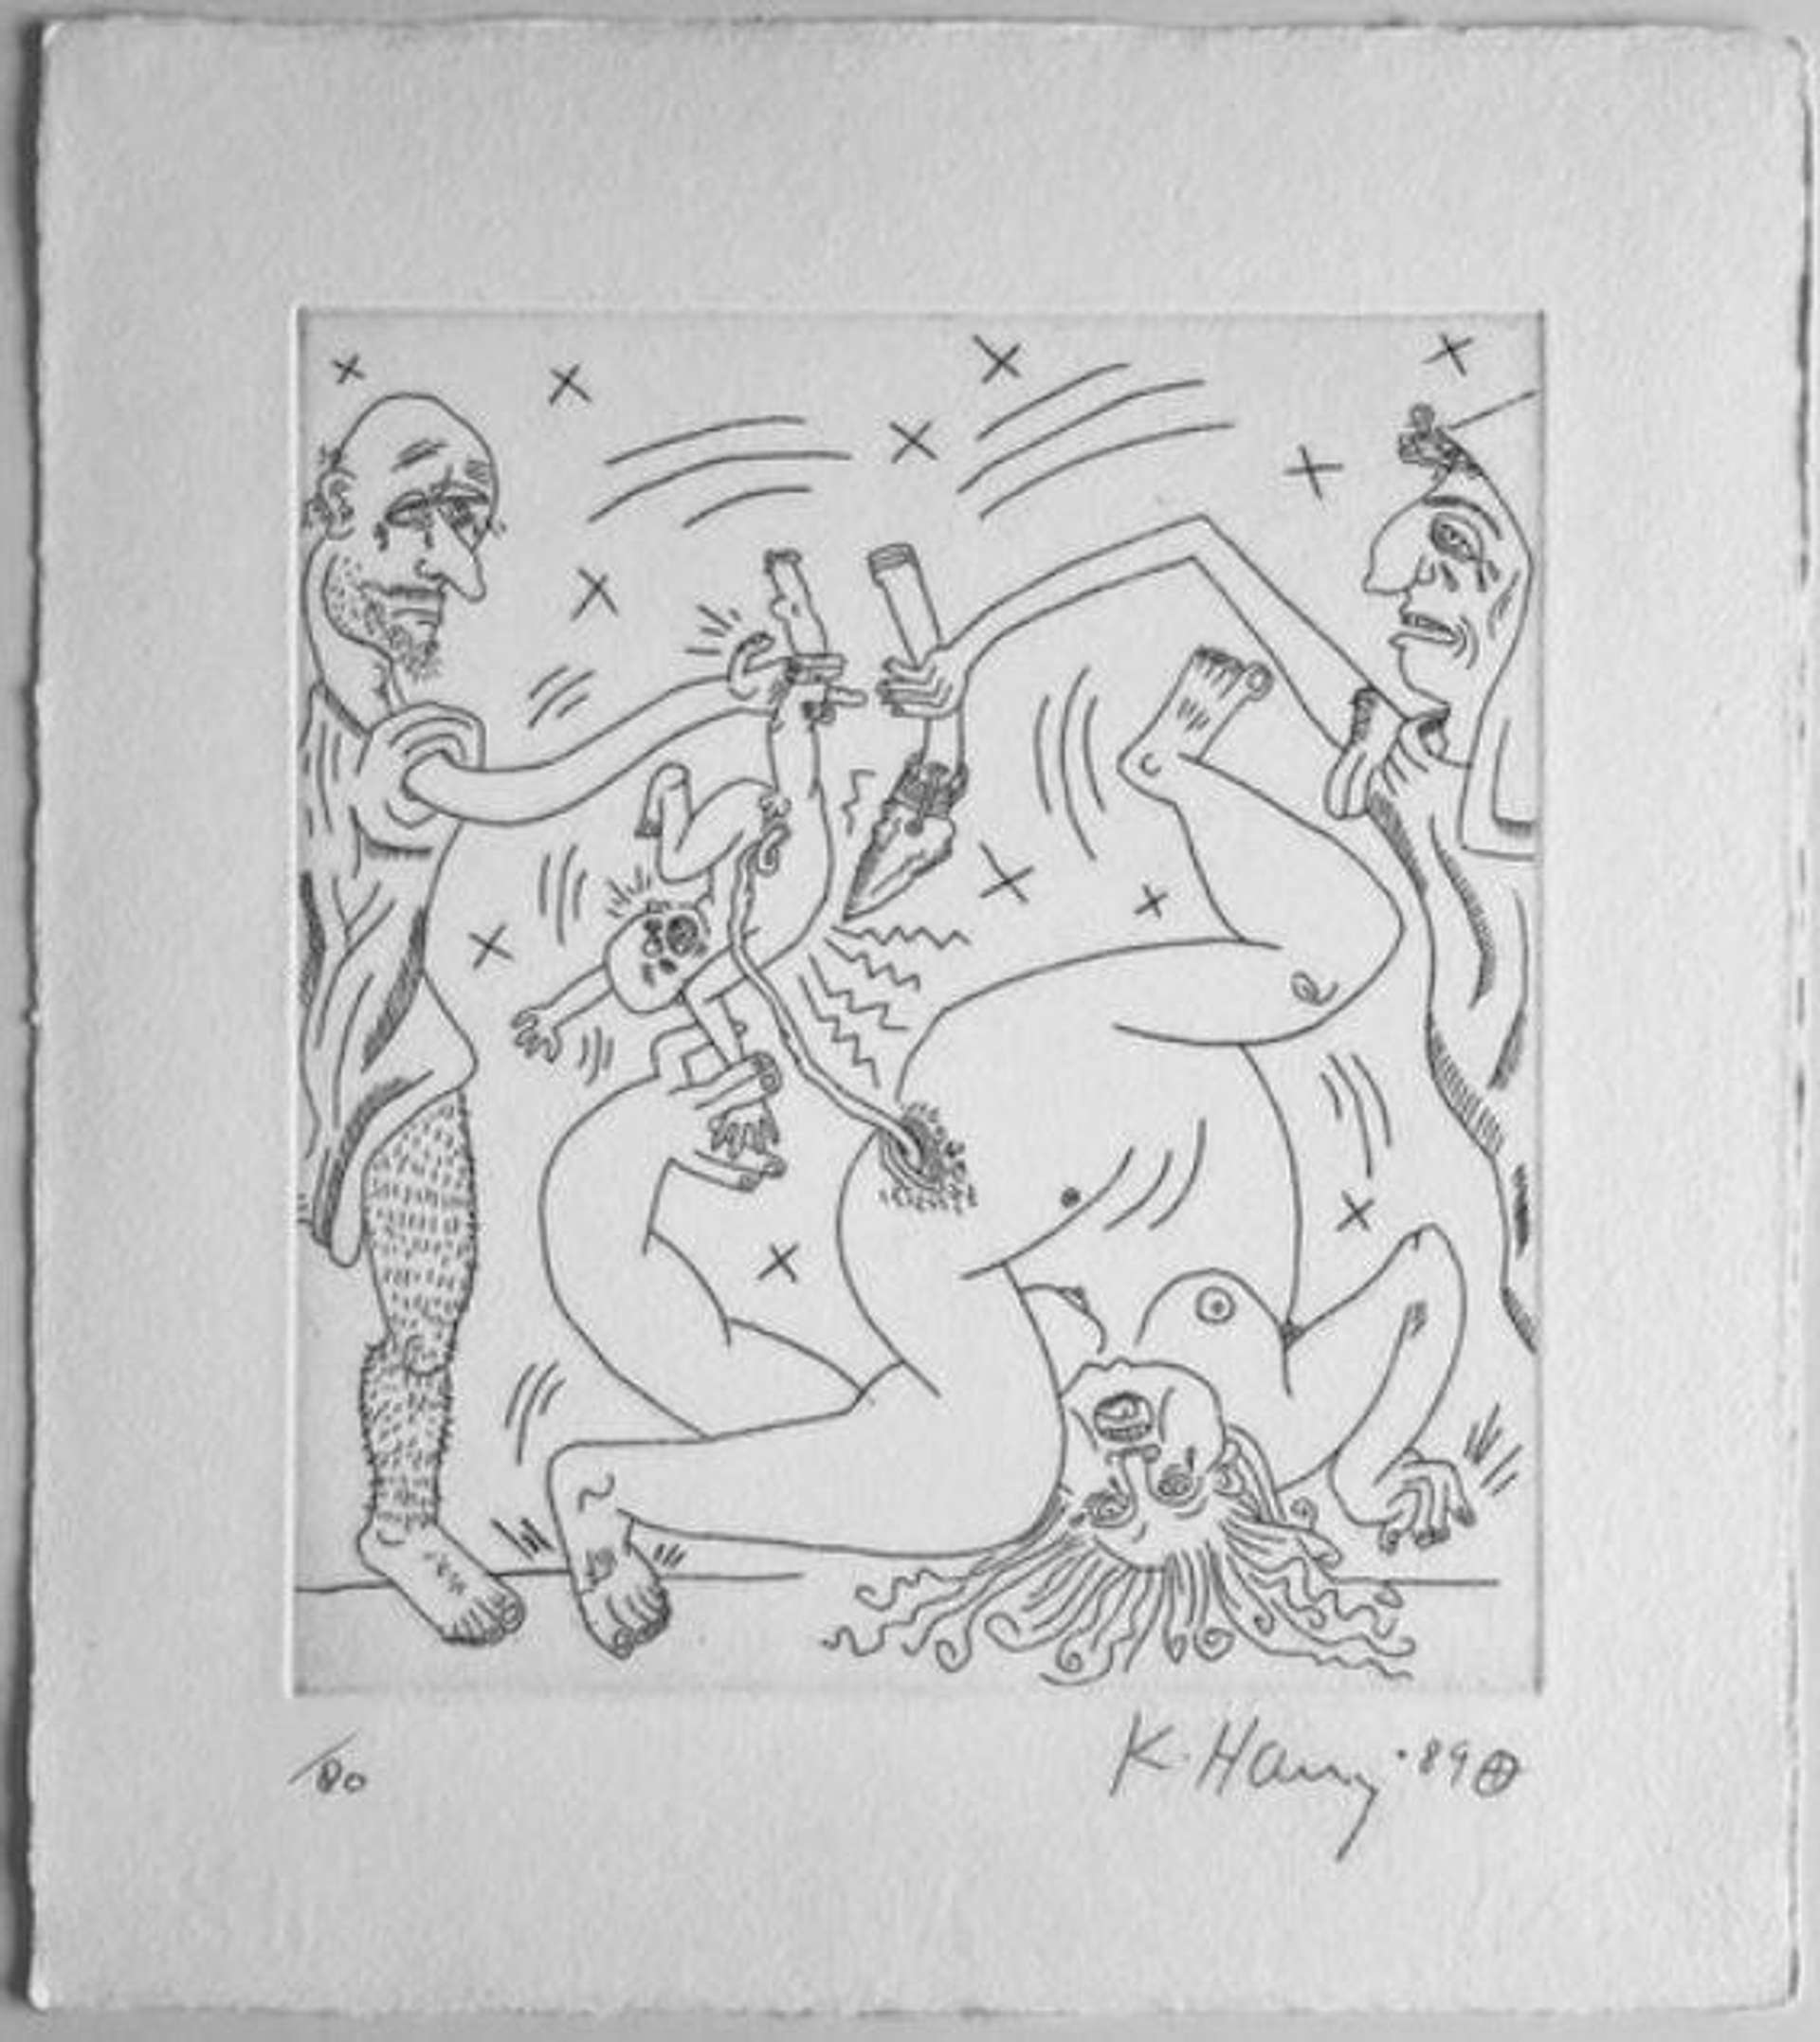 The Valley Page 1 - Signed Print by Keith Haring 1989 - MyArtBroker